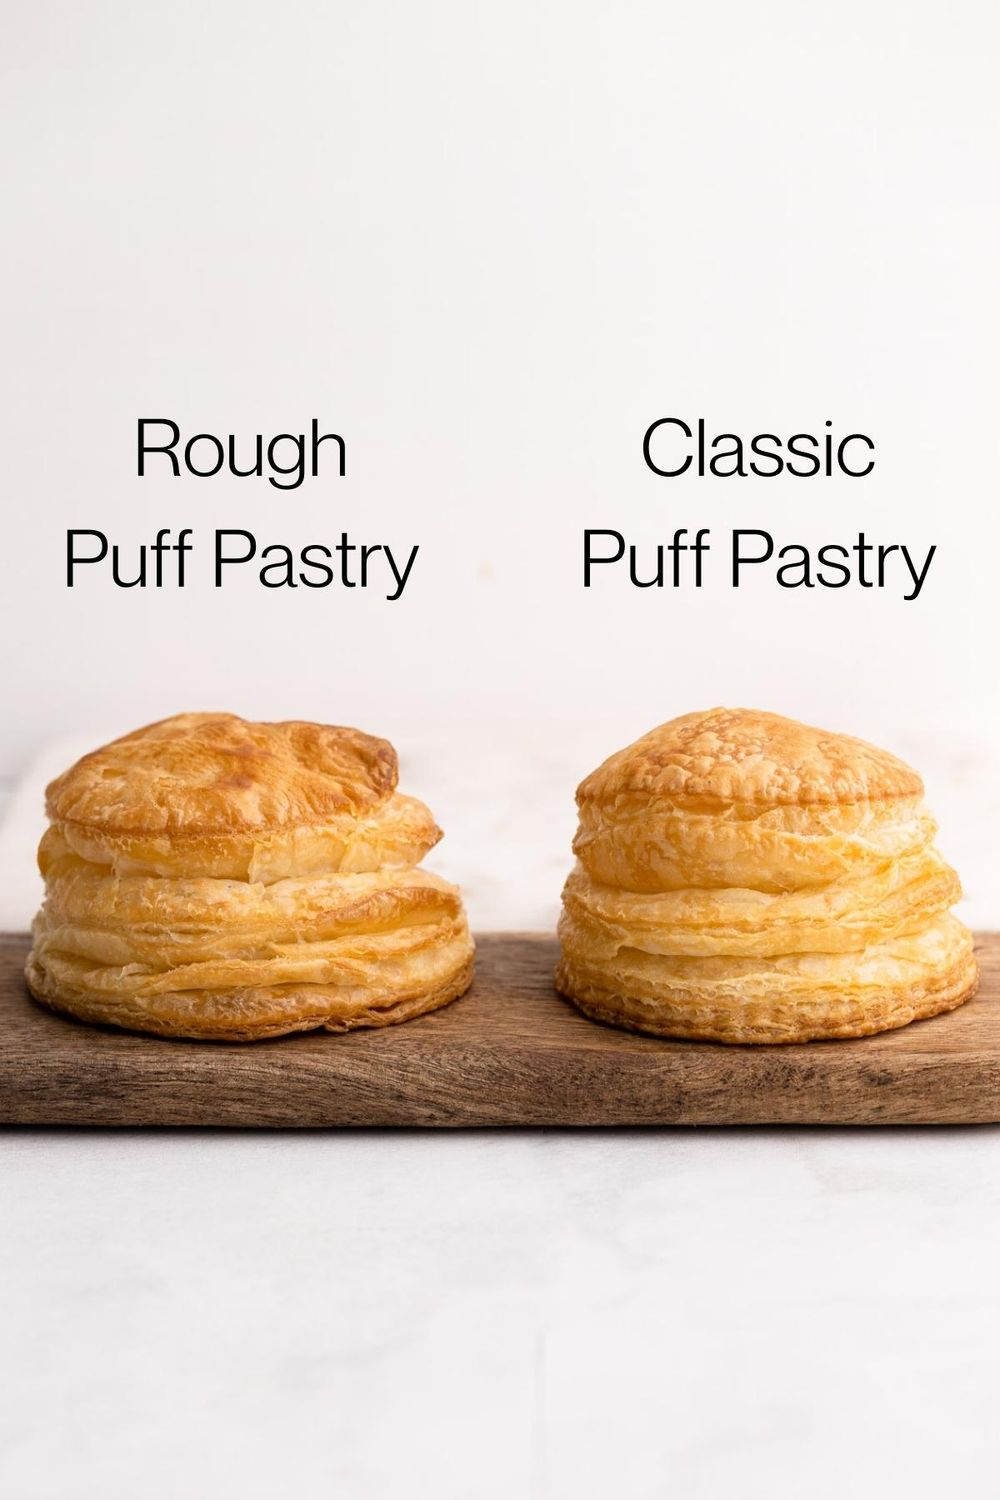 One baked classic puff pastry next to one baked piece of rough puff pastry.